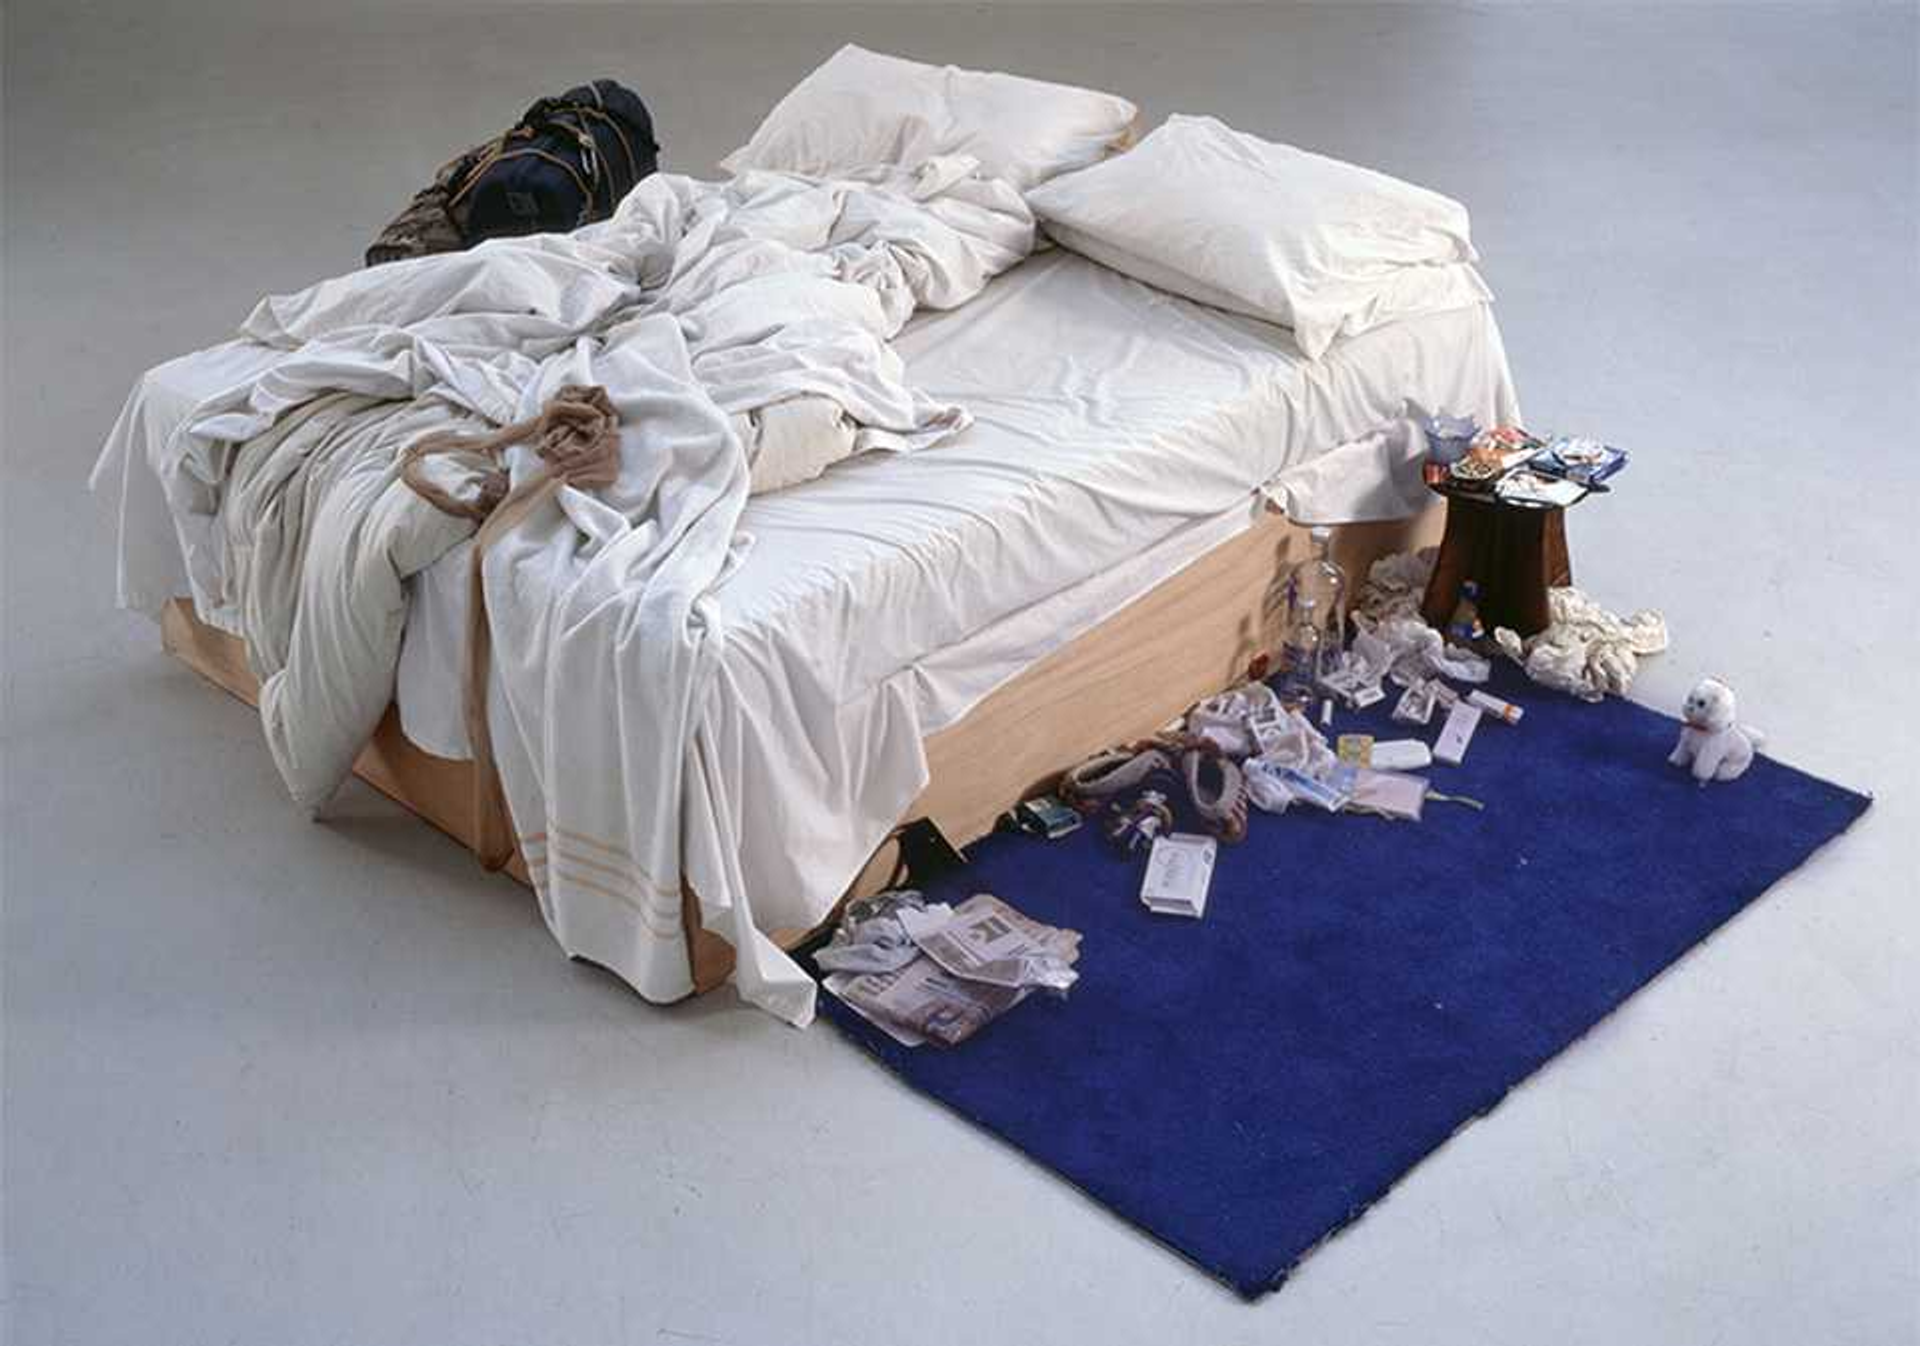 Photograph of Tracey Emin’s My Bed. An unmade bed with bunched up bedding, next to a blue rug covered with junk and personal items.